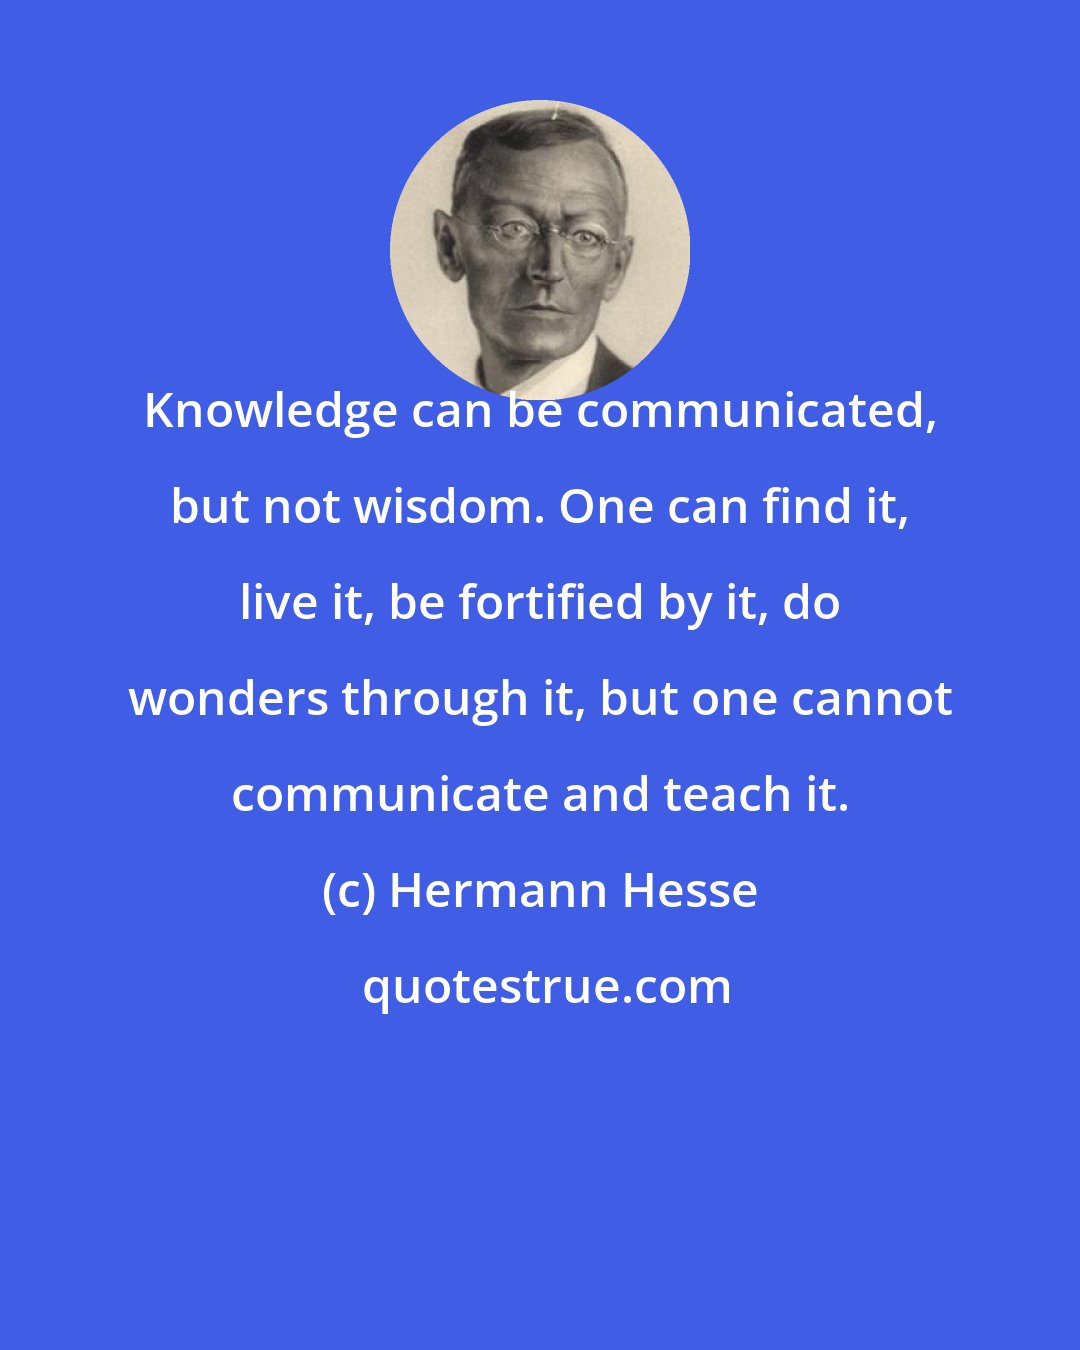 Hermann Hesse: Knowledge can be communicated, but not wisdom. One can find it, live it, be fortified by it, do wonders through it, but one cannot communicate and teach it.